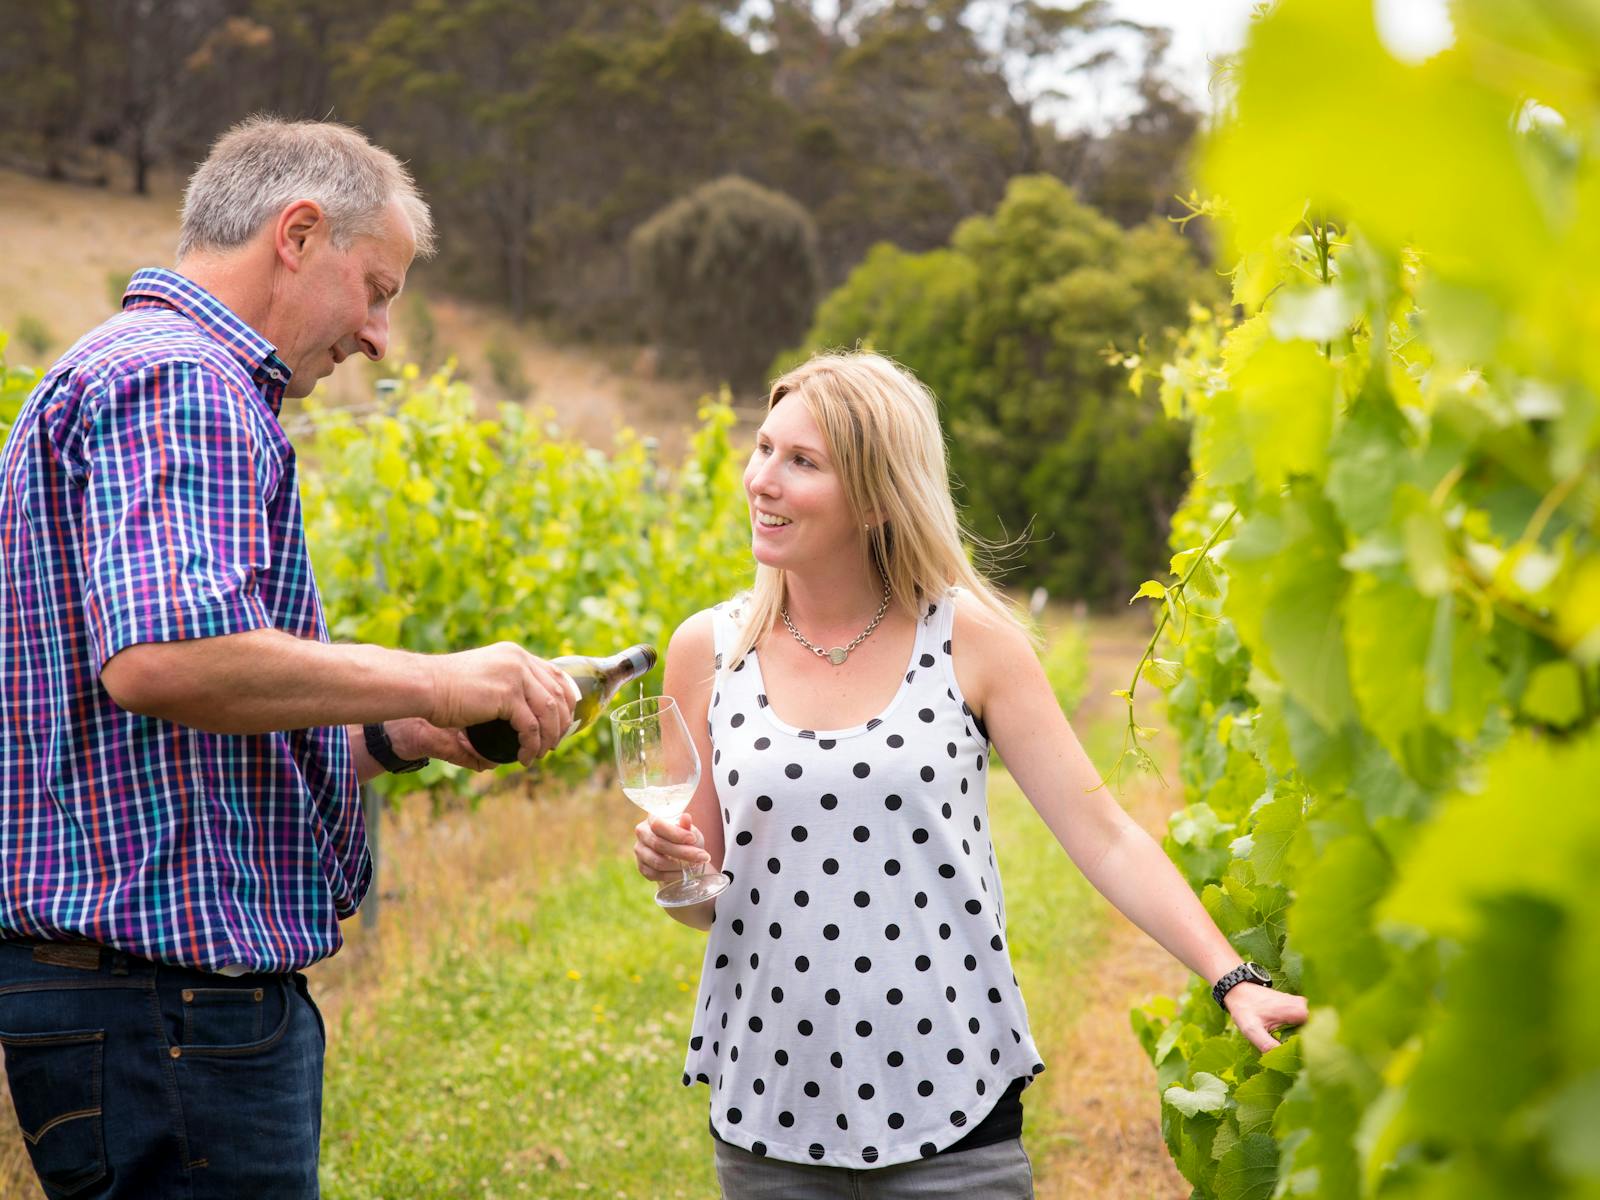 A man pouring a glass of wine for a woman in a spotted top, standing in between vineyard rows